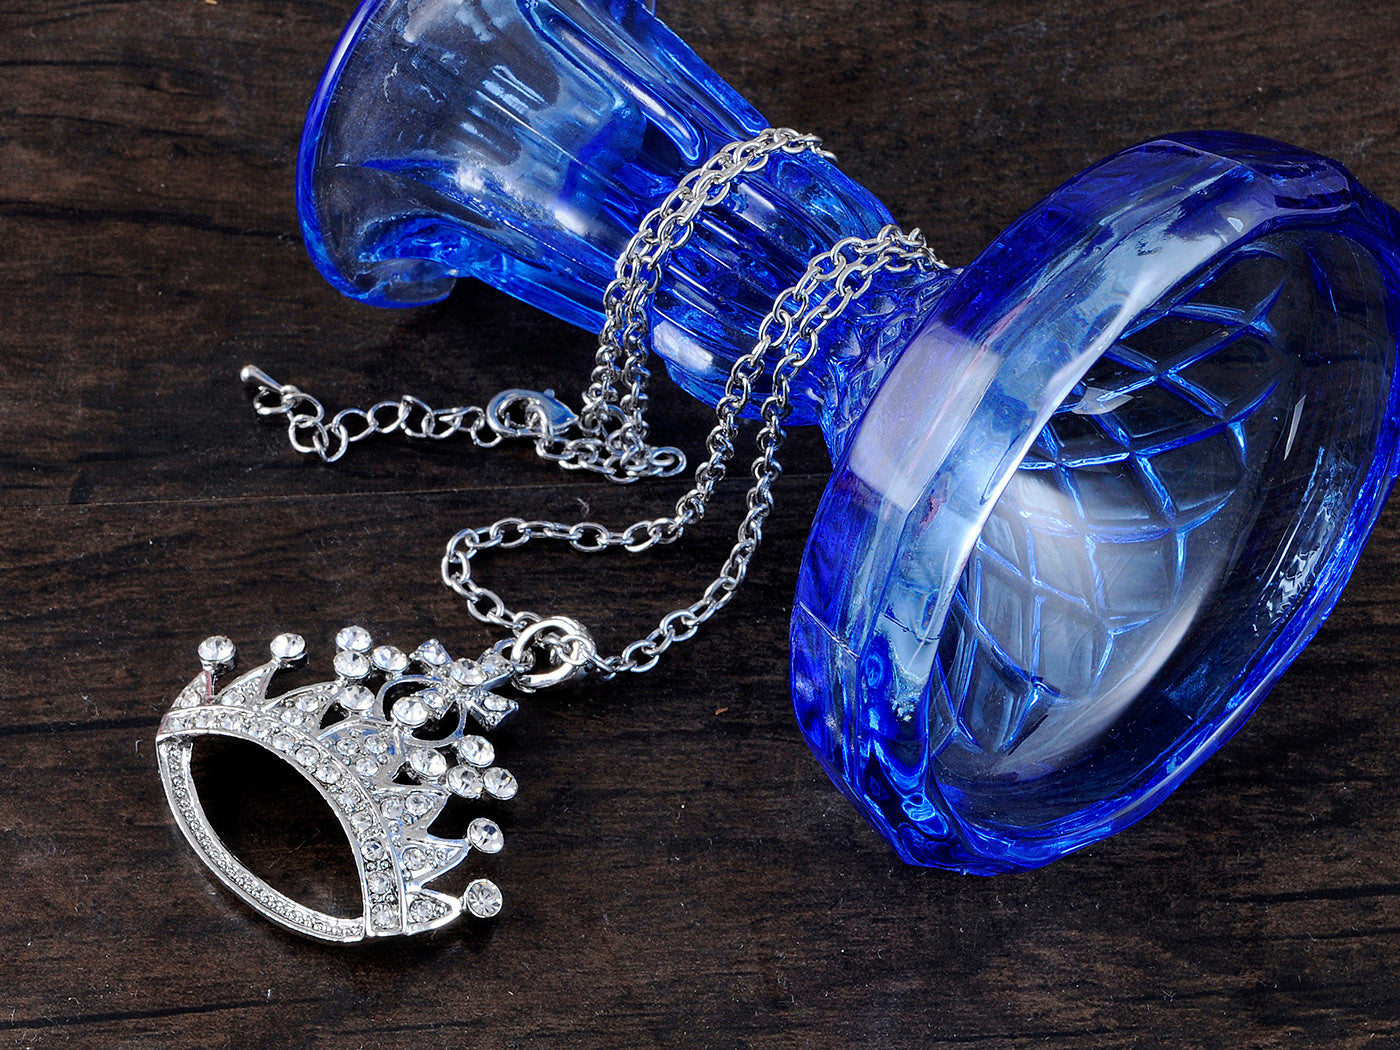 Bling Ice Empress Crown Royal Pendant Necklace